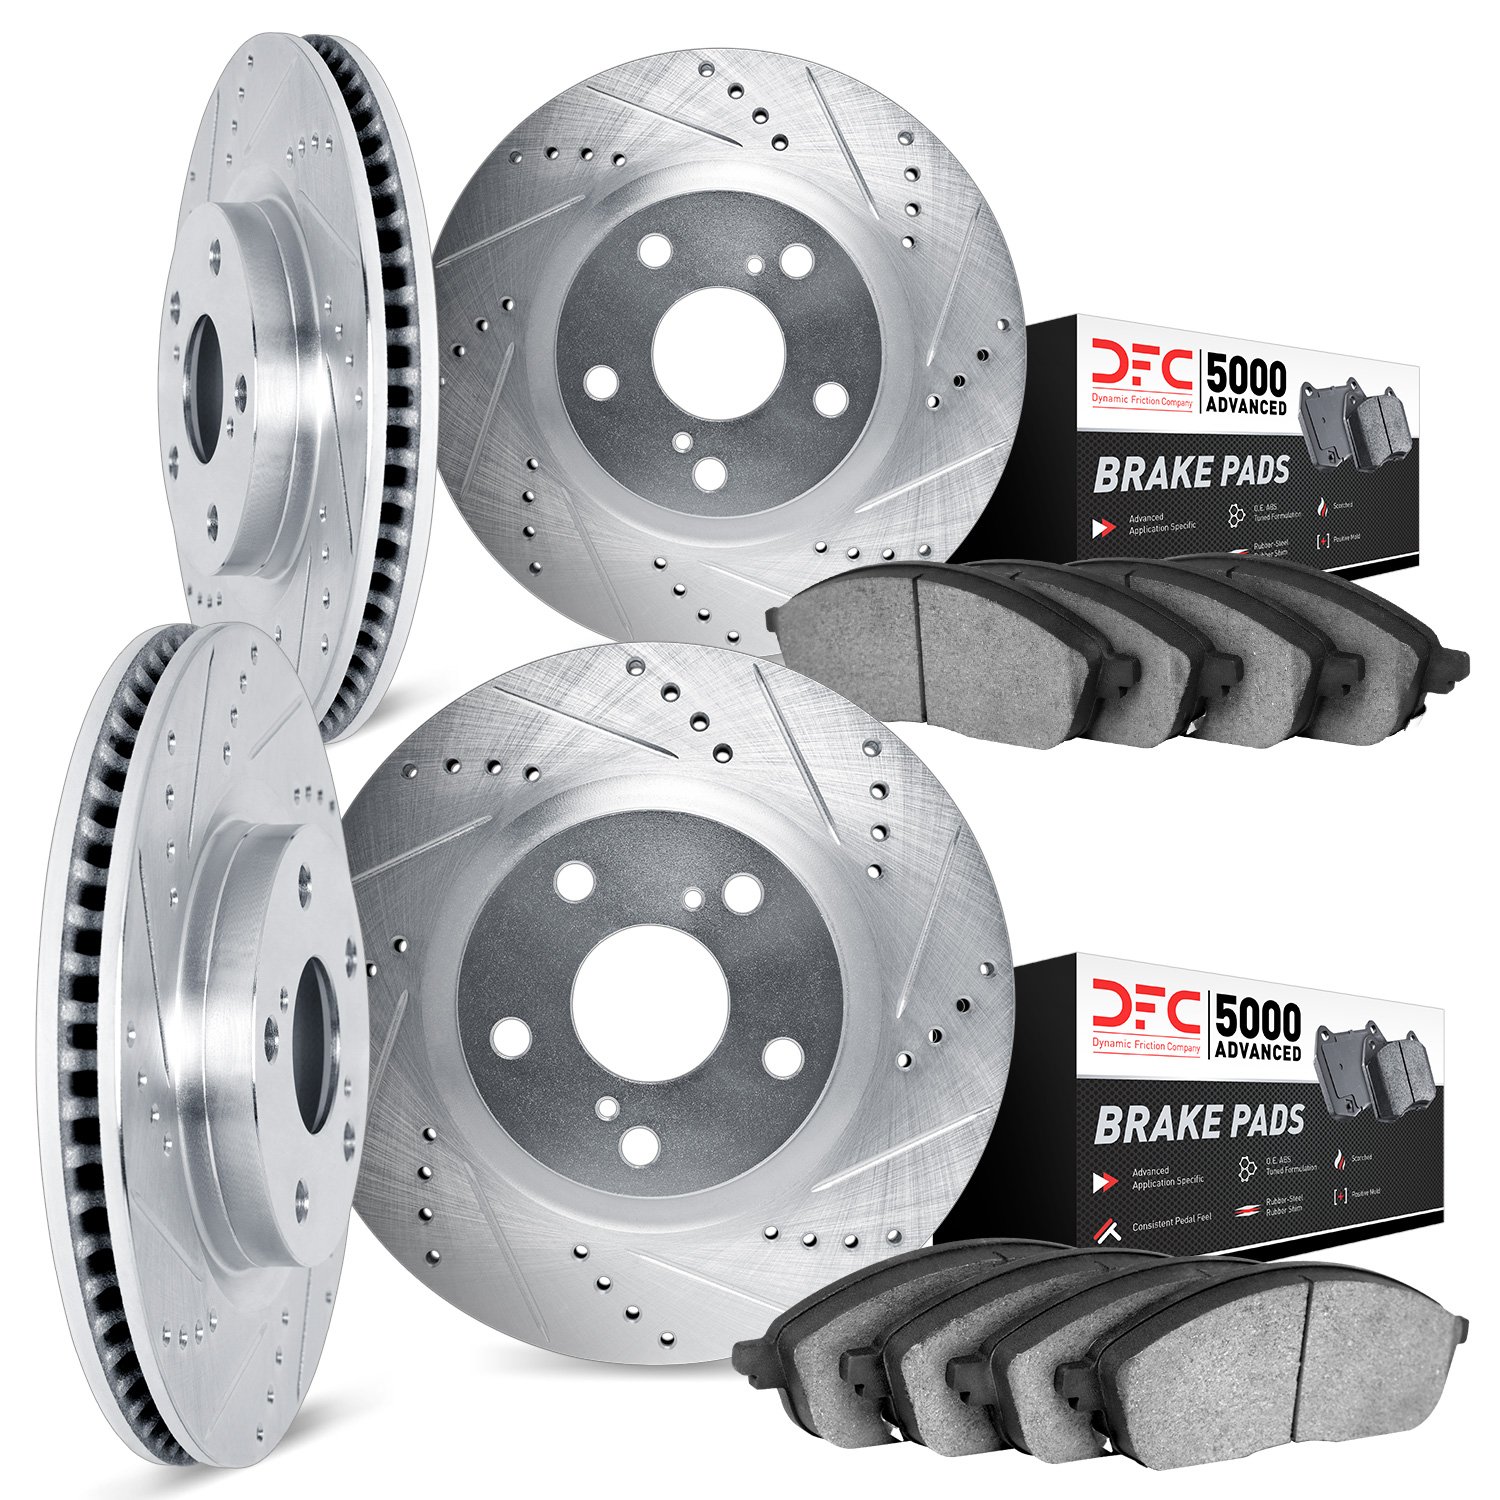 7504-55014 Drilled/Slotted Brake Rotors w/5000 Advanced Brake Pads Kit [Silver], 2003-2011 Ford/Lincoln/Mercury/Mazda, Position: